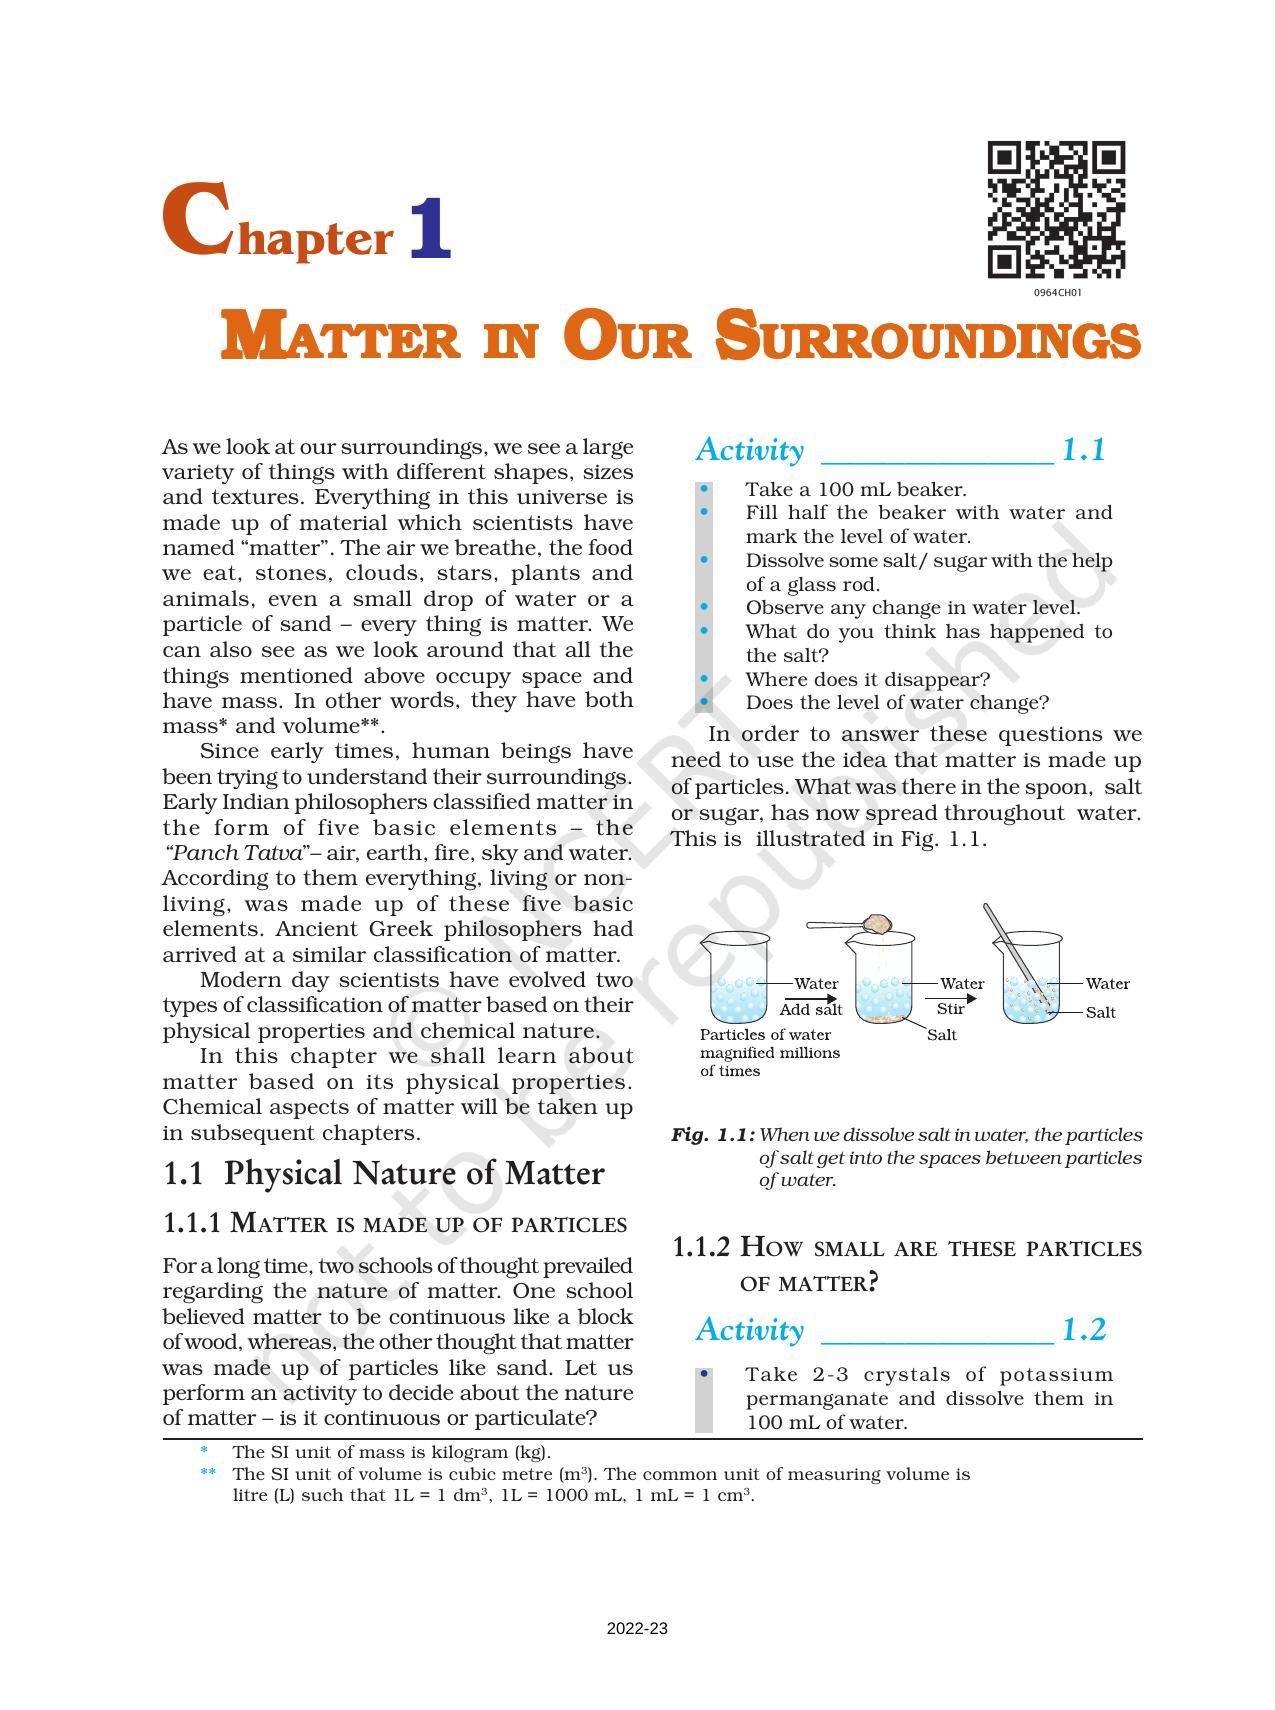 NCERT Book for Class 9 Science Chapter 1 Matter in Our Surroundings - Page 1